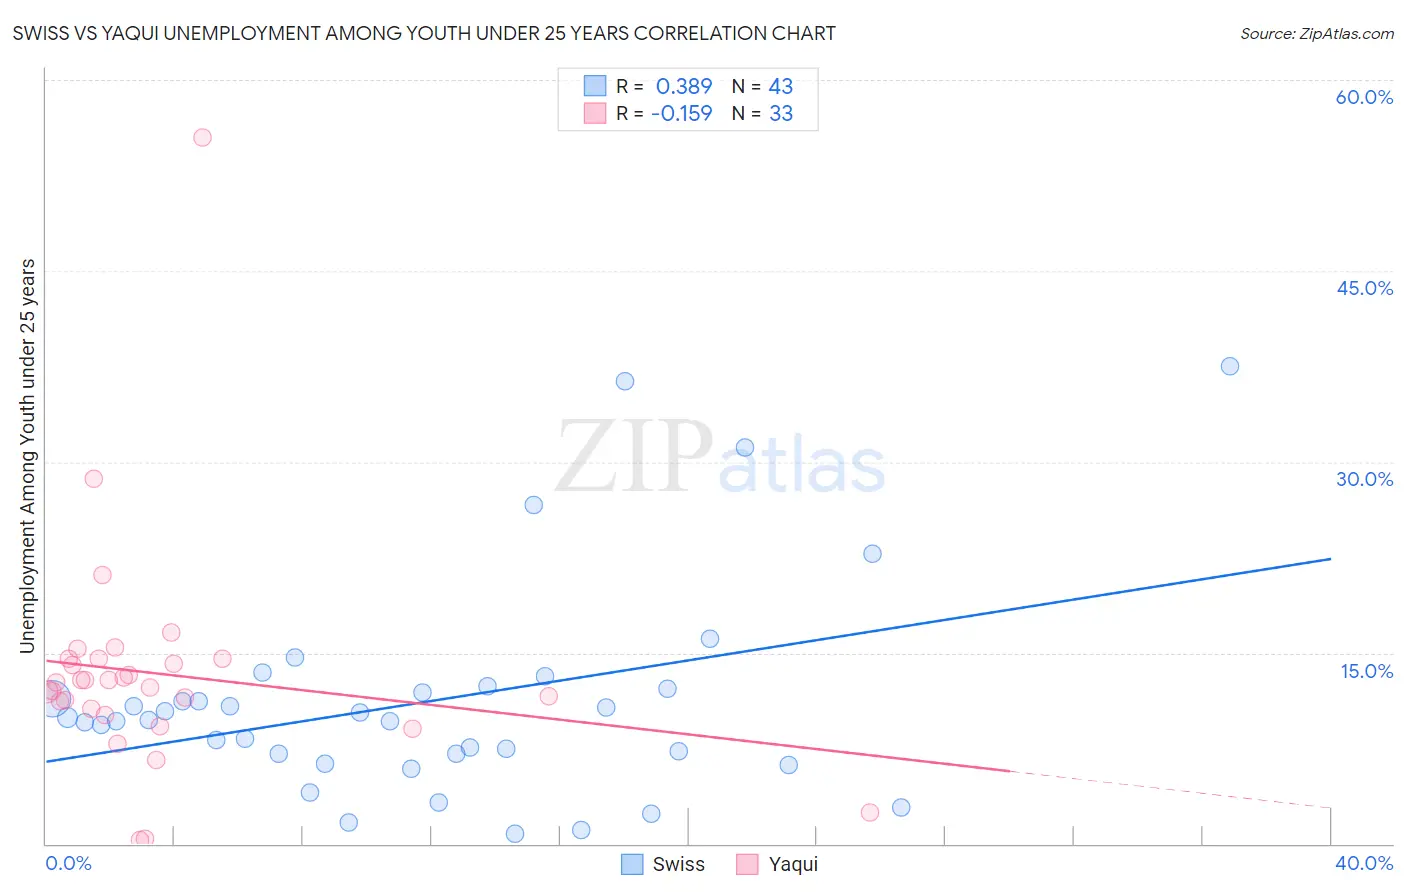 Swiss vs Yaqui Unemployment Among Youth under 25 years